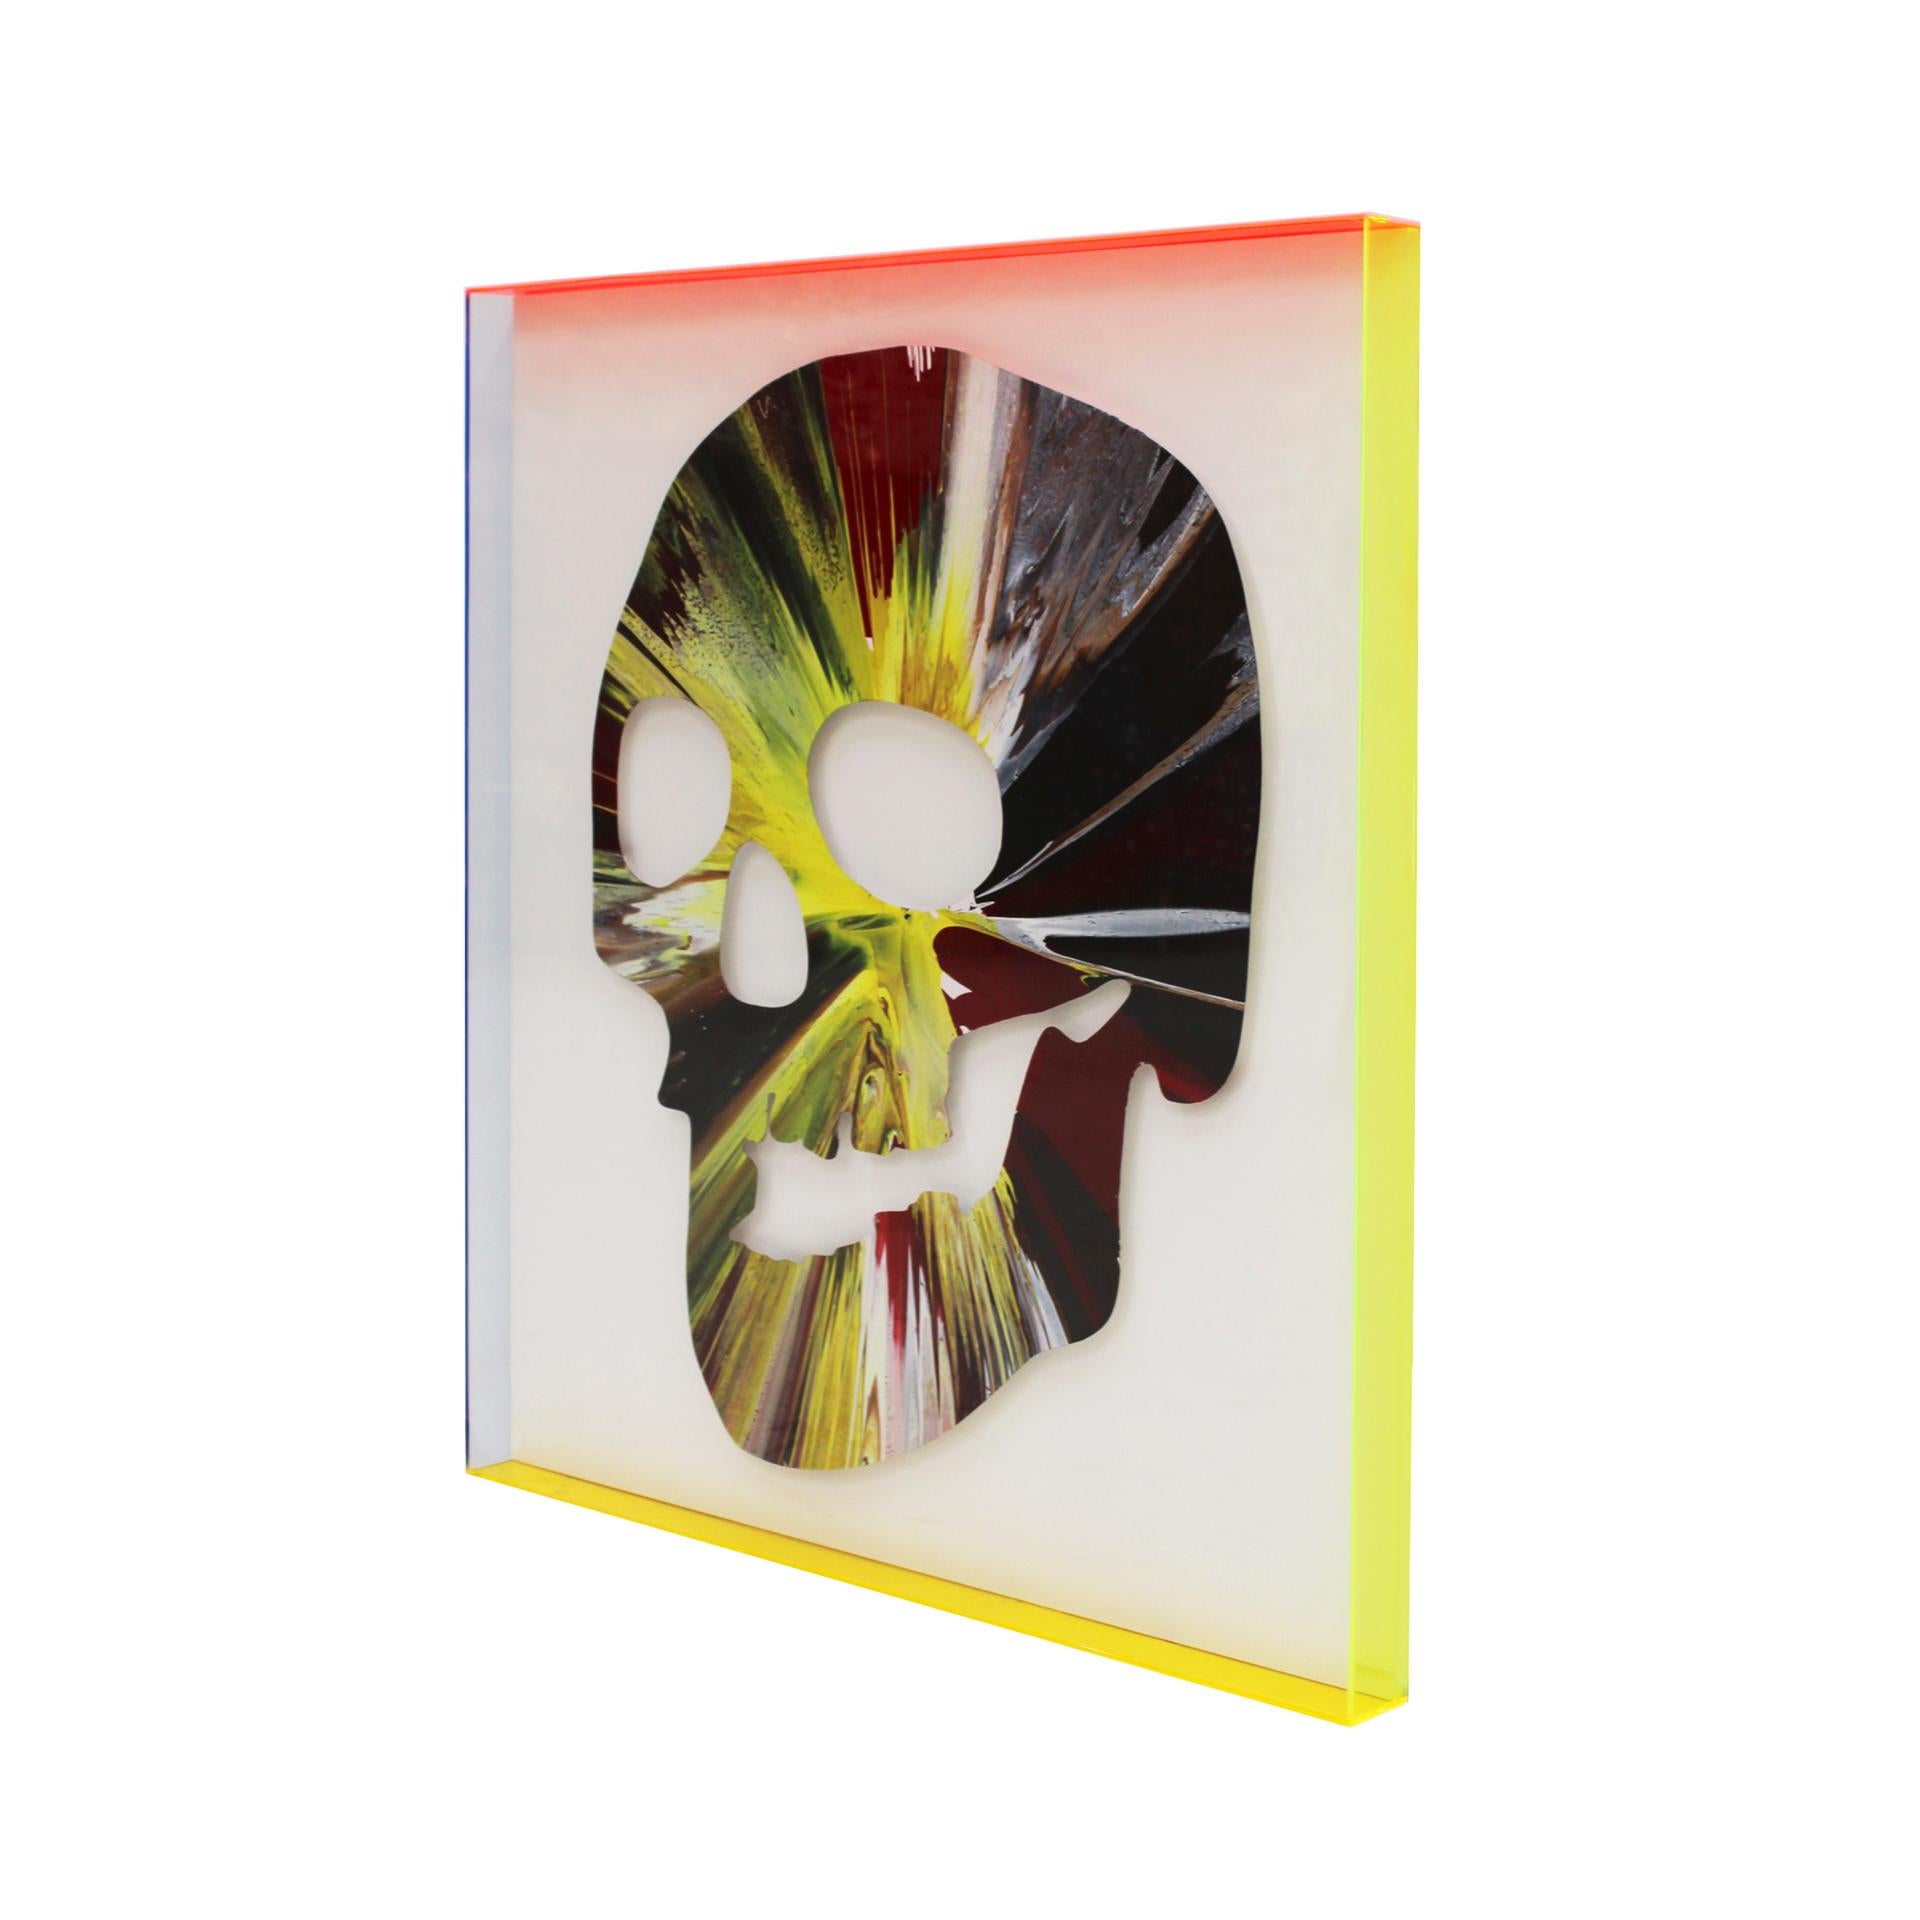 Skull spin painting by artist Damien Hirst.

Work in acrylic, framed in a methacrylate case with sides in fluorescent colors and a wooden background that reveals the artist's signature on the back.

This piece of art was made to celebrate the